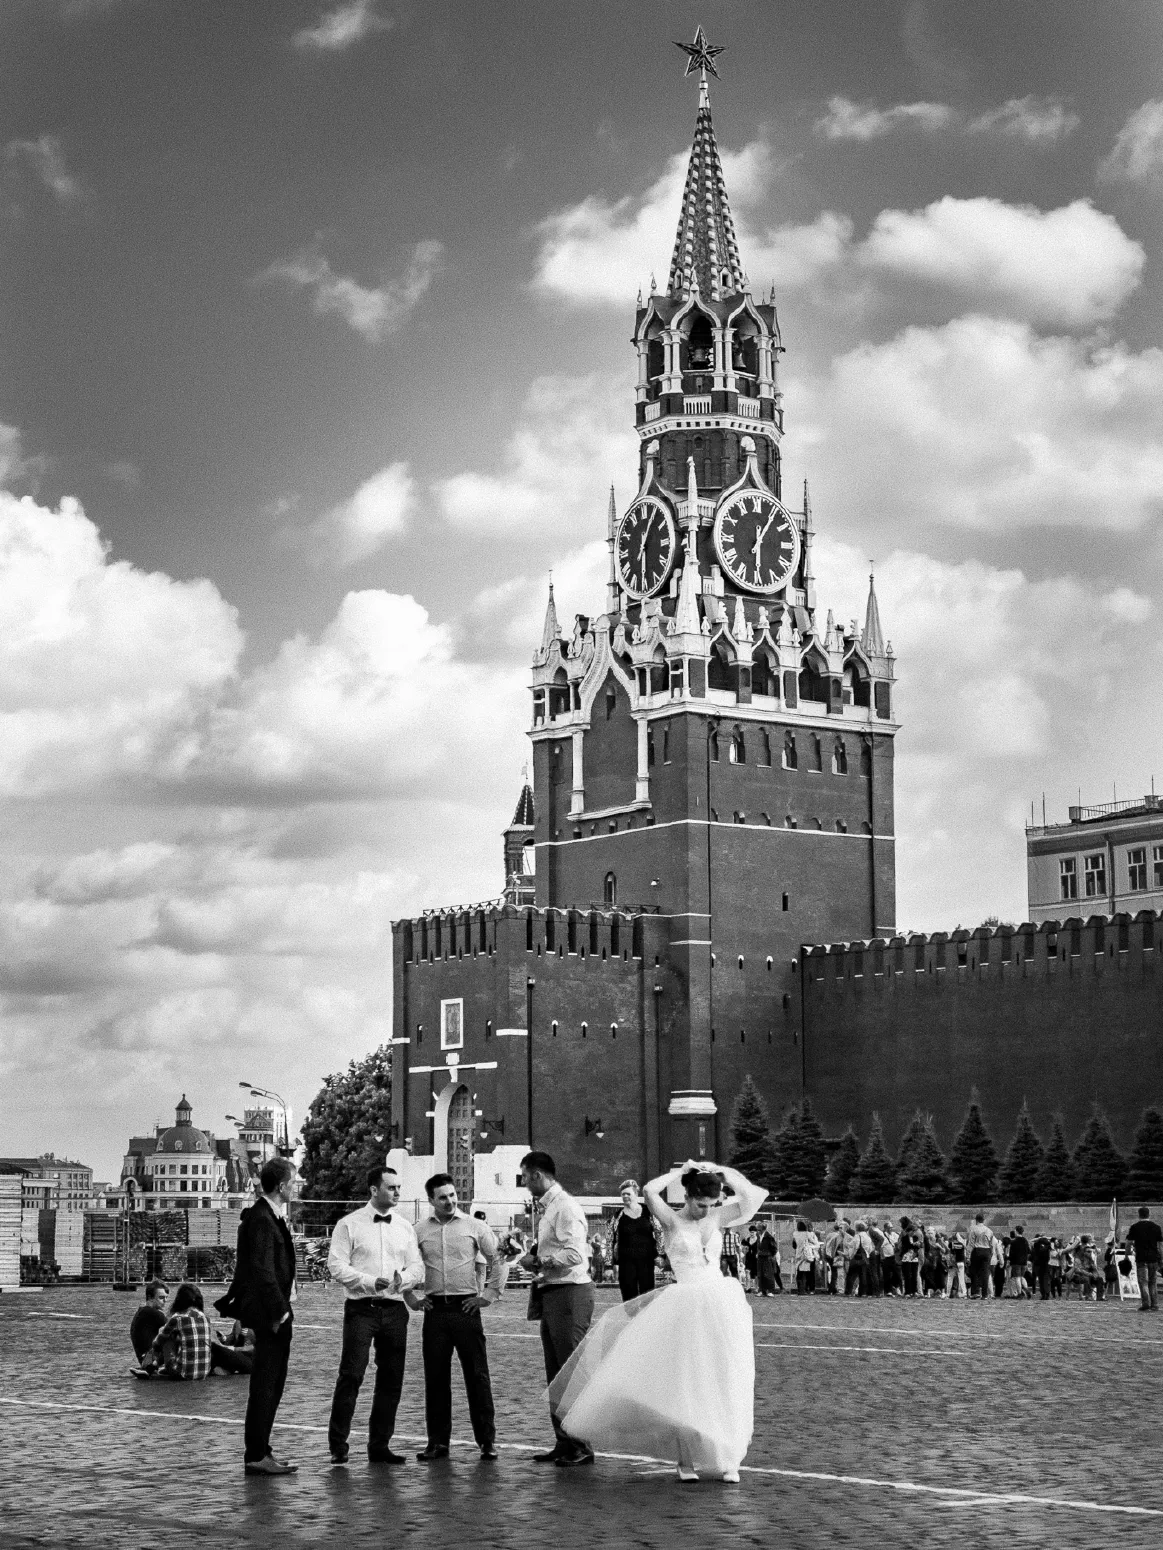 THE BRIDE. Red Square, Moscow, Russia. July 2013